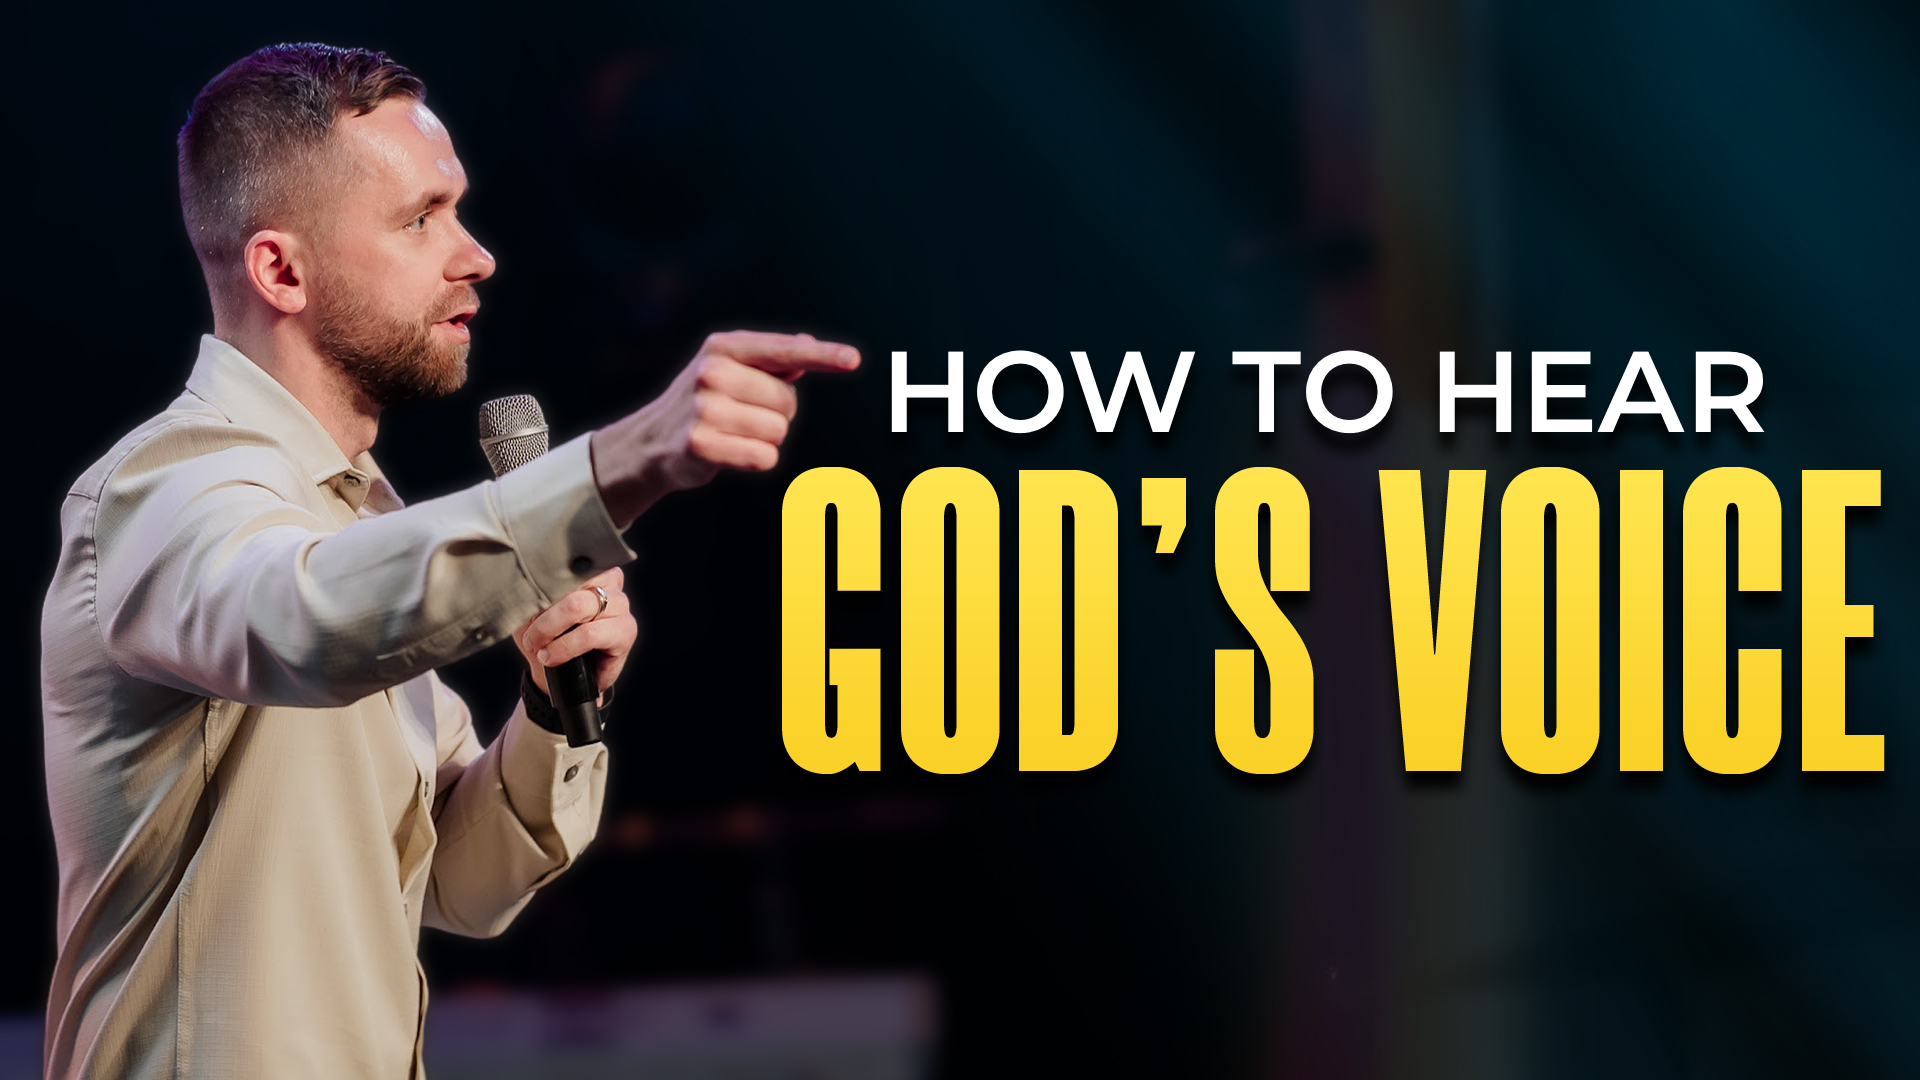 Featured image for “How to Hear God’s Voice”